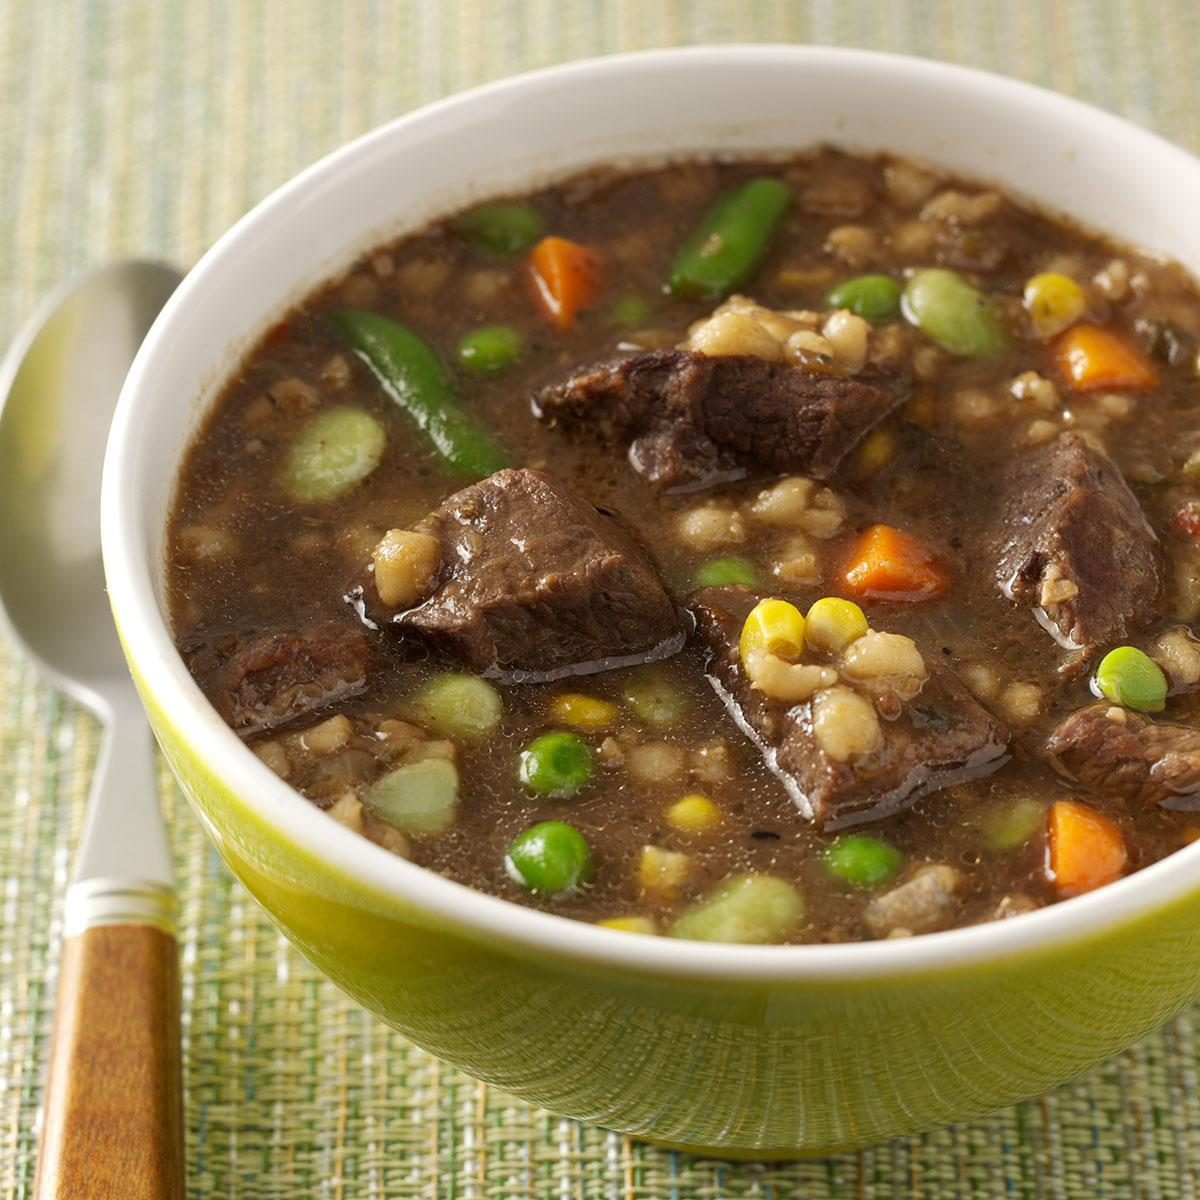 Cubed Beef and Barley Soup Recipe: How to Make It | Taste of Home